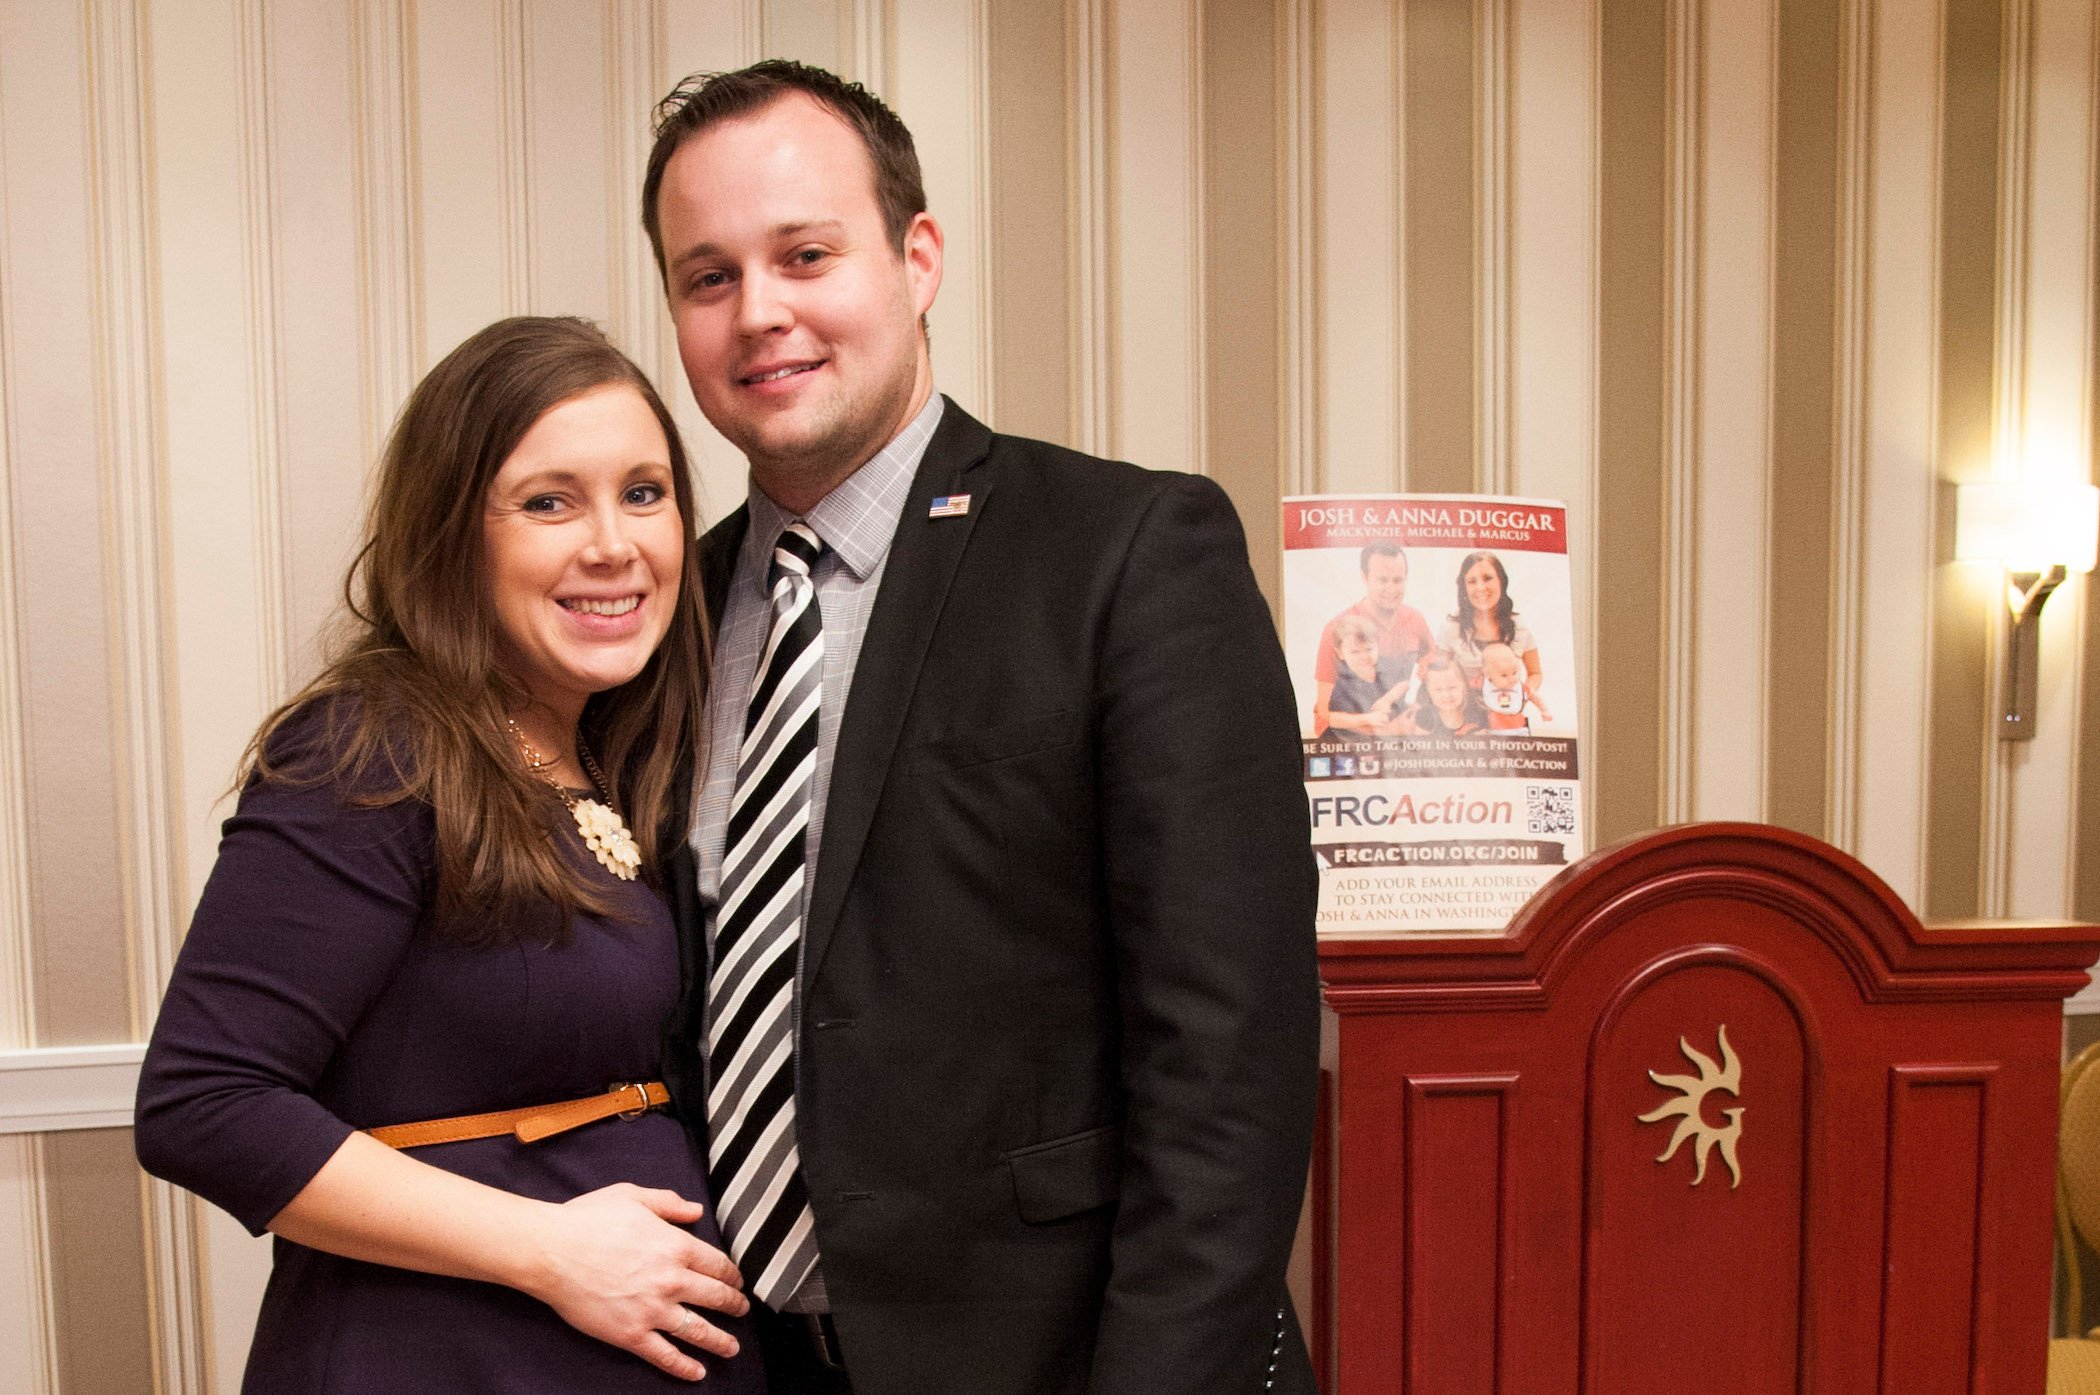 Josh Duggar with his wife, Anna Duggar, posing and smiling. Anna Duggar is holding her pregnant belly